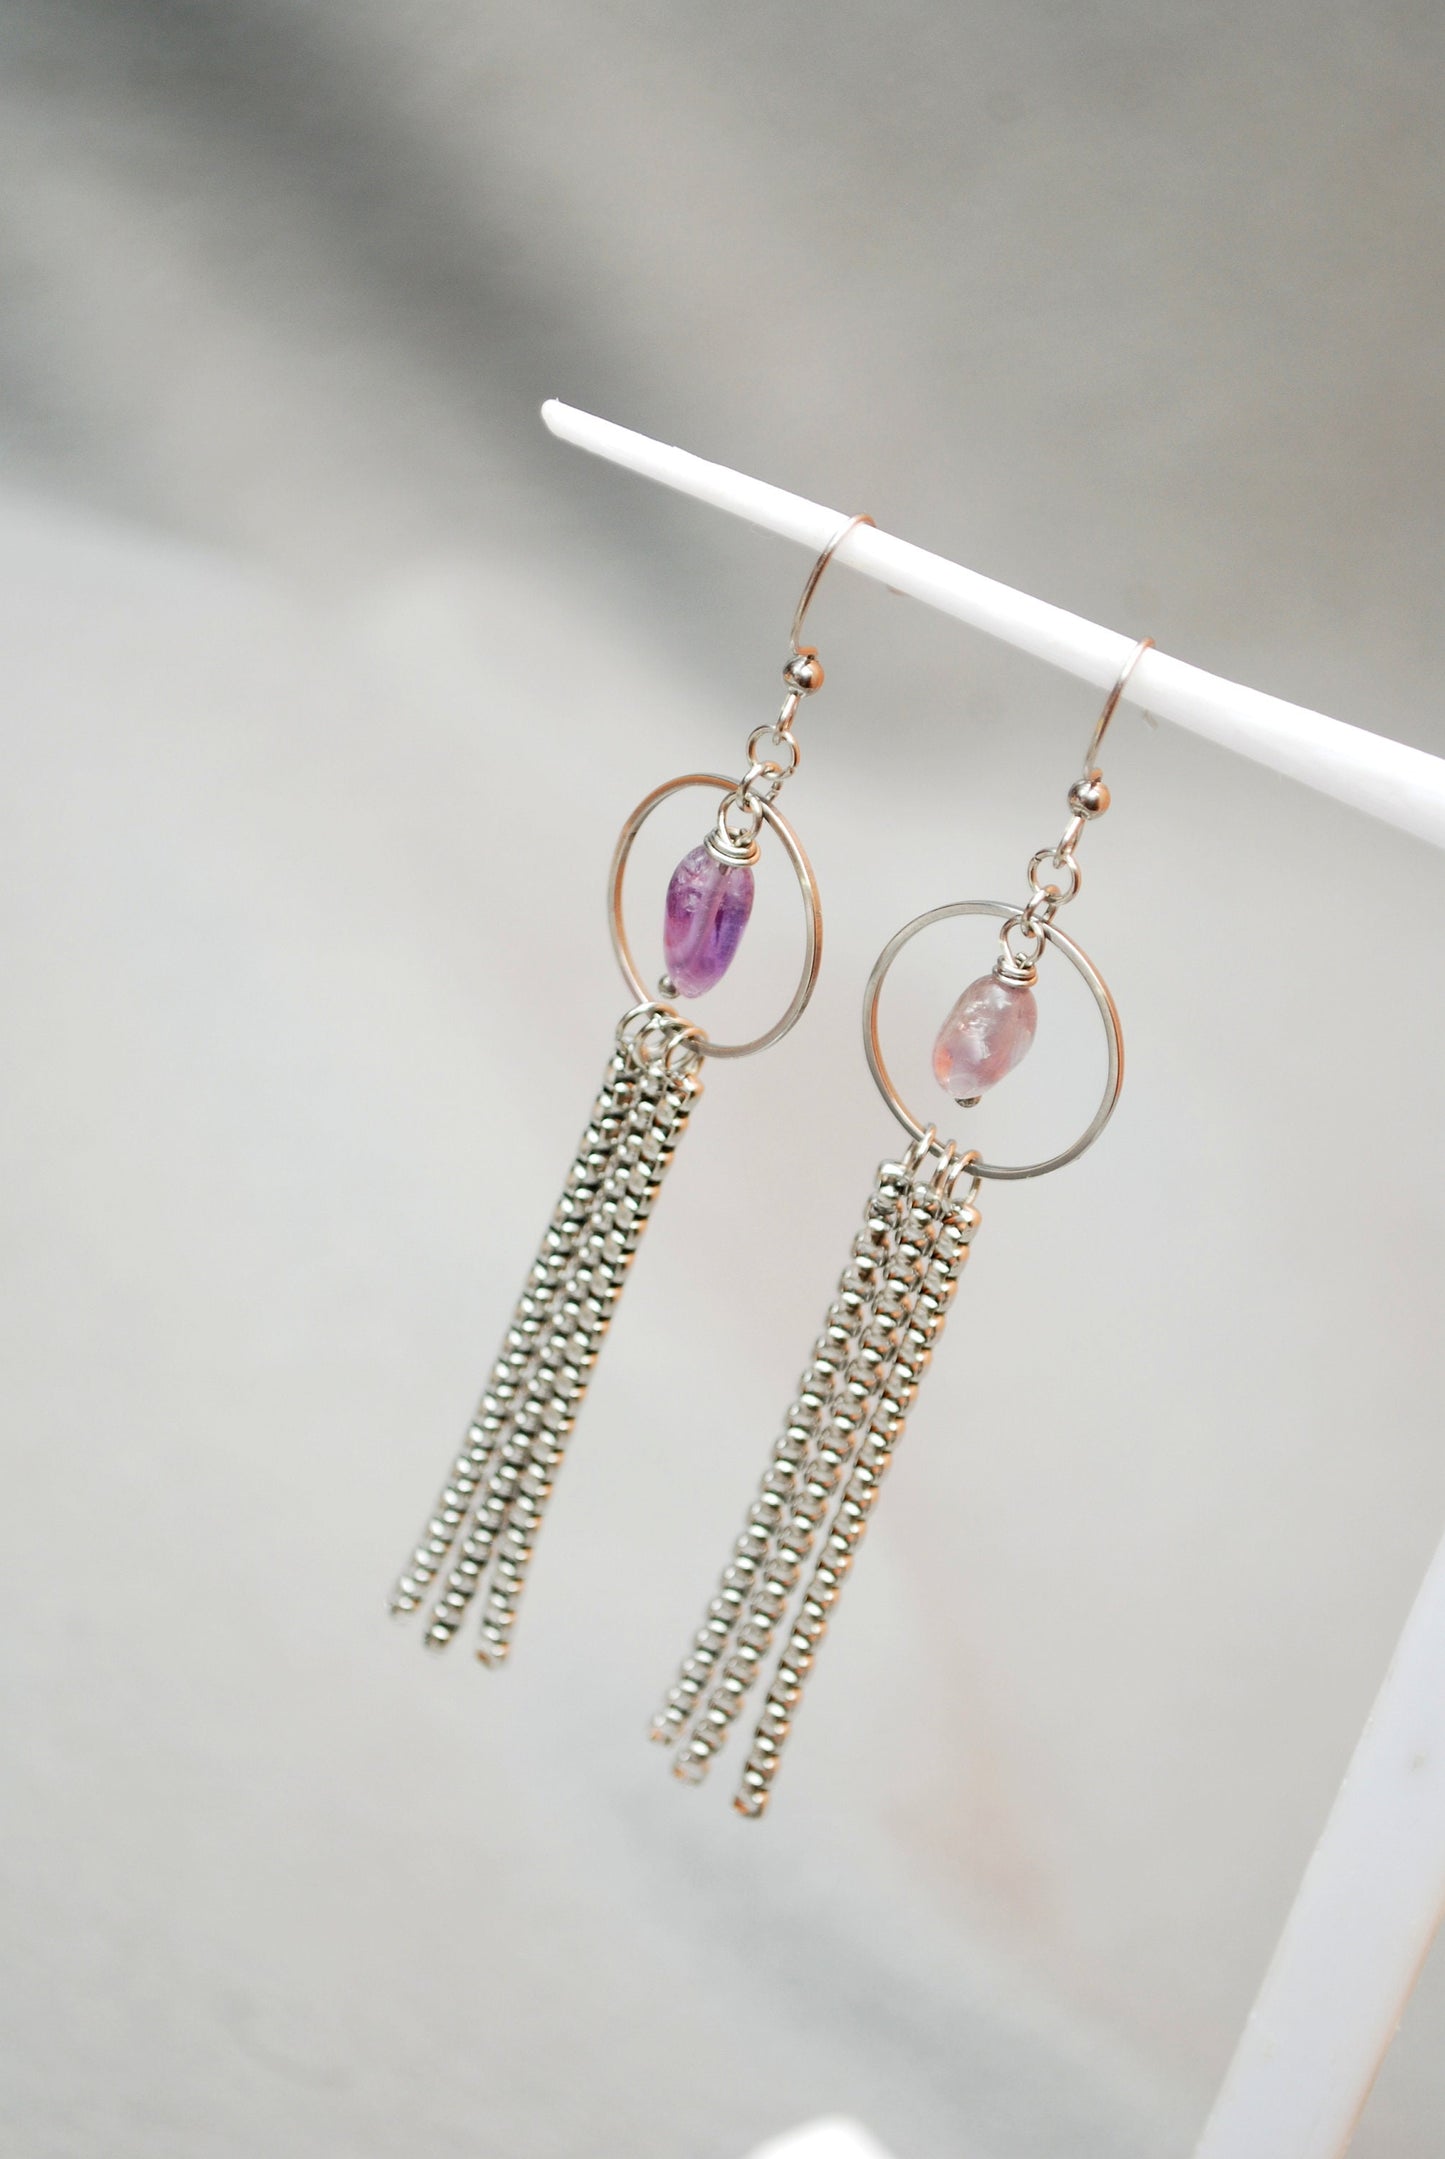 Vibrant Stainless Steel Earrings with Amethyst Beads: Playful Accessories for the Modern Fashionista! Estibela design. 10cm - 4"